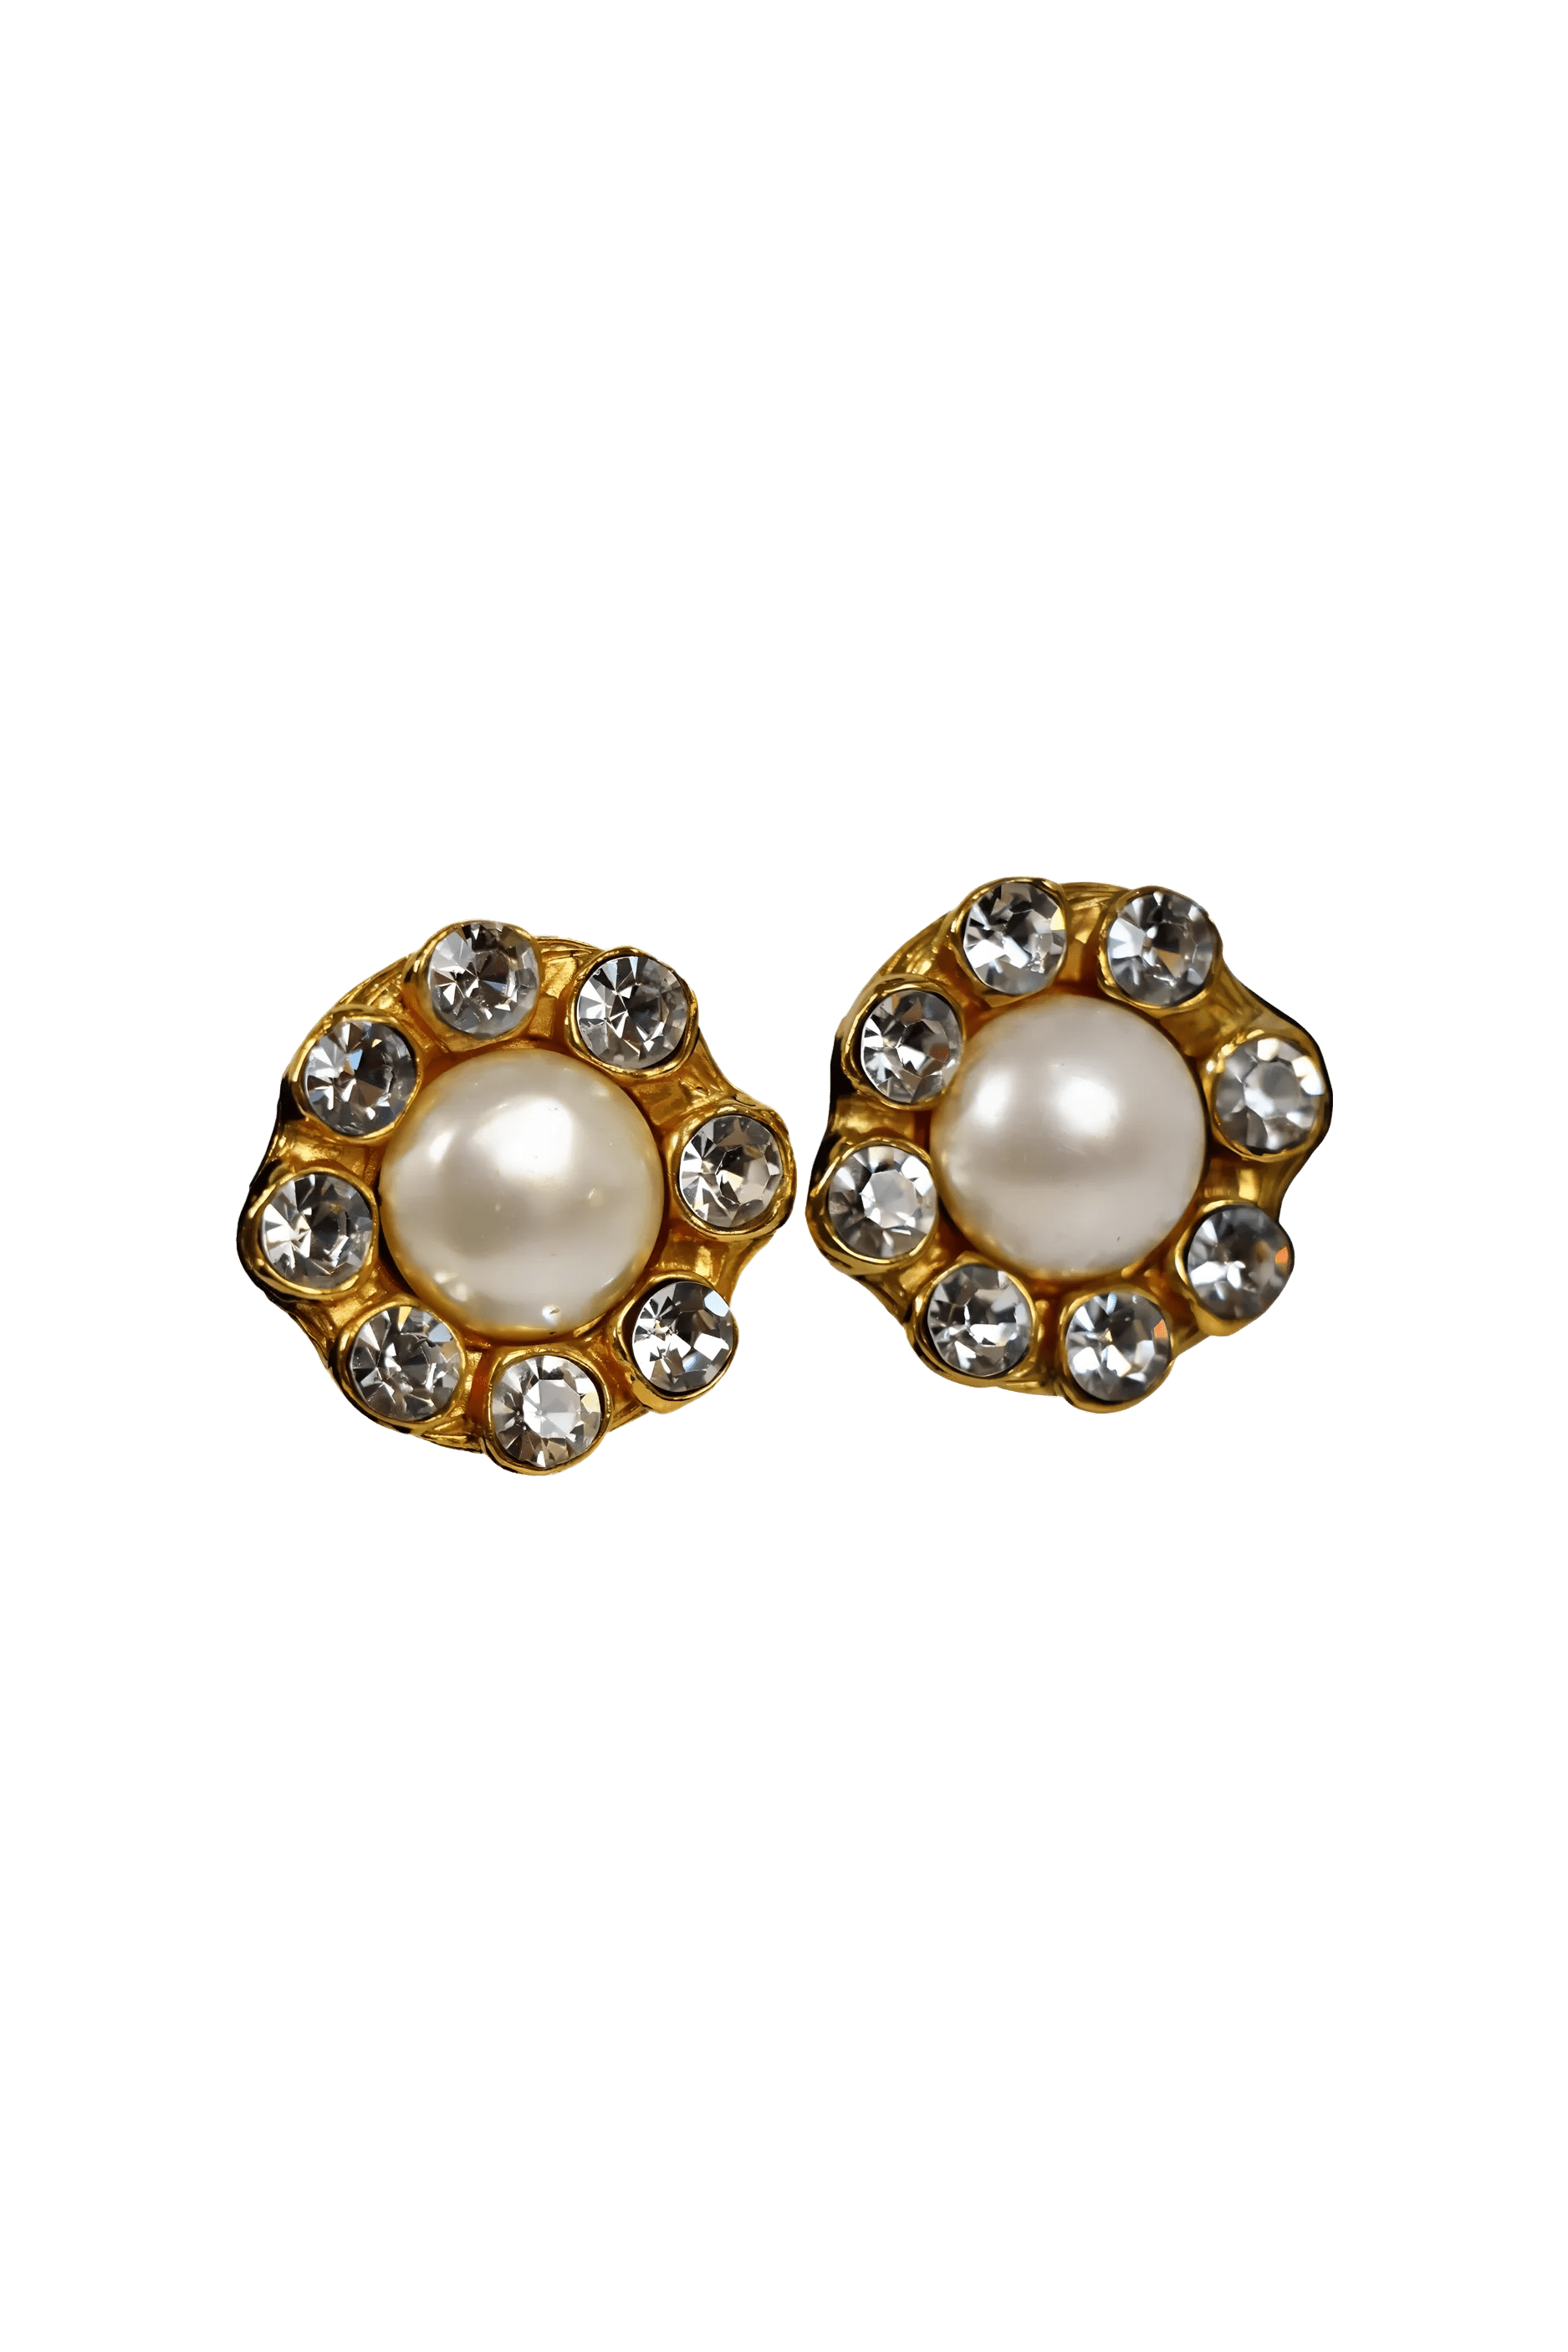 Chanel Vintage 1970's Crystal & Pearl Flower Earrings - Foxy Couture Carmel